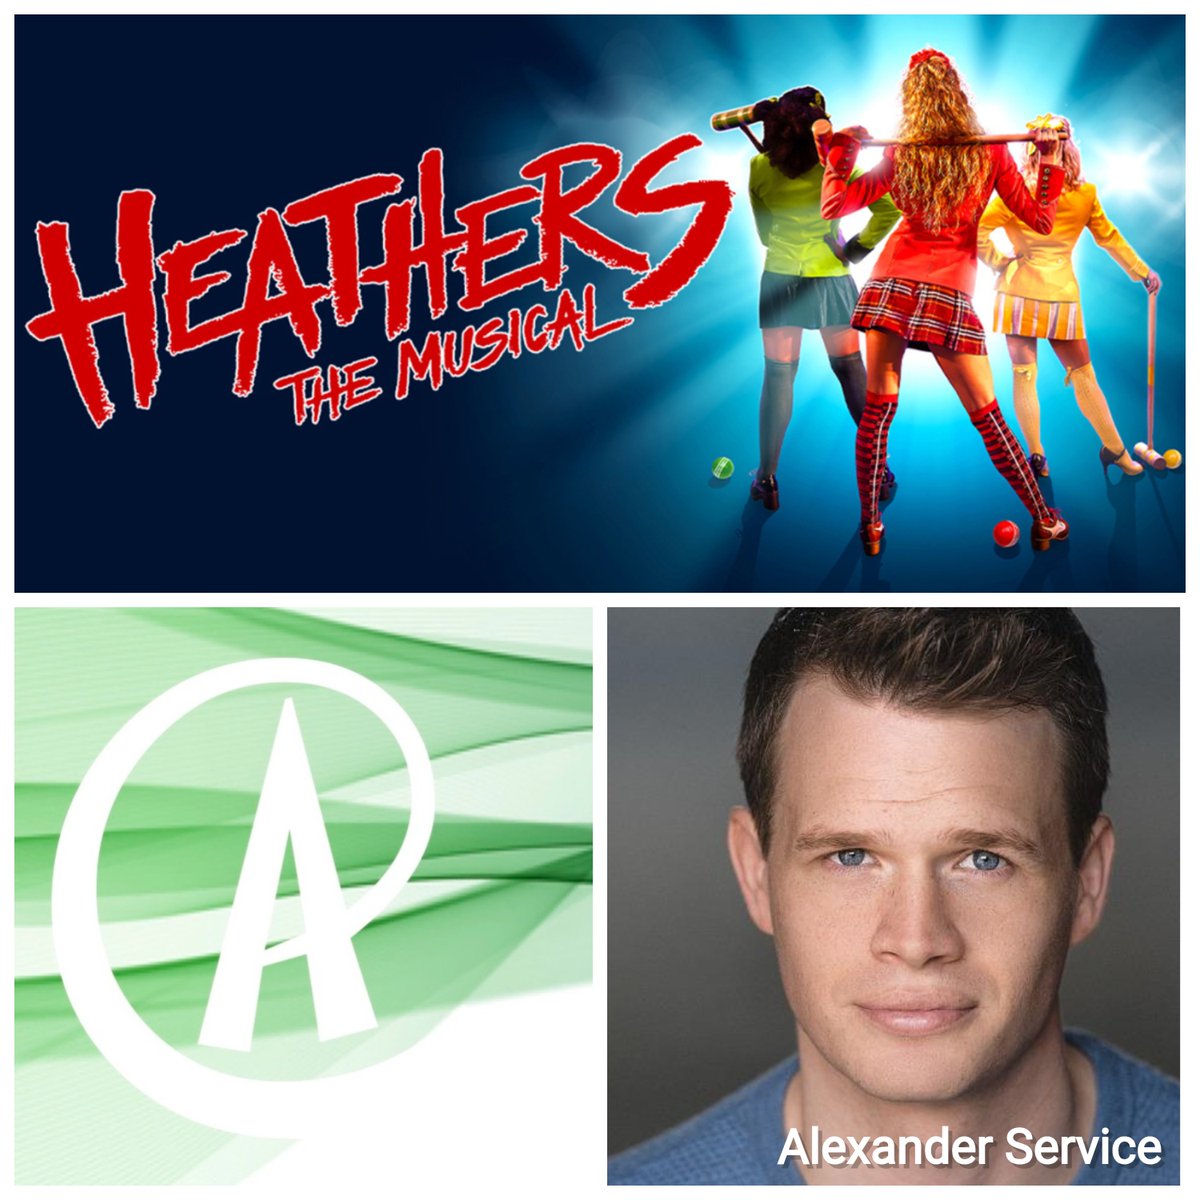 Congratulations to @TheAlexService who will appear in @HeathersMusical @sohoplacelondon and UK Tour. Casting by: @BKL_Productions heathersthemusical.com